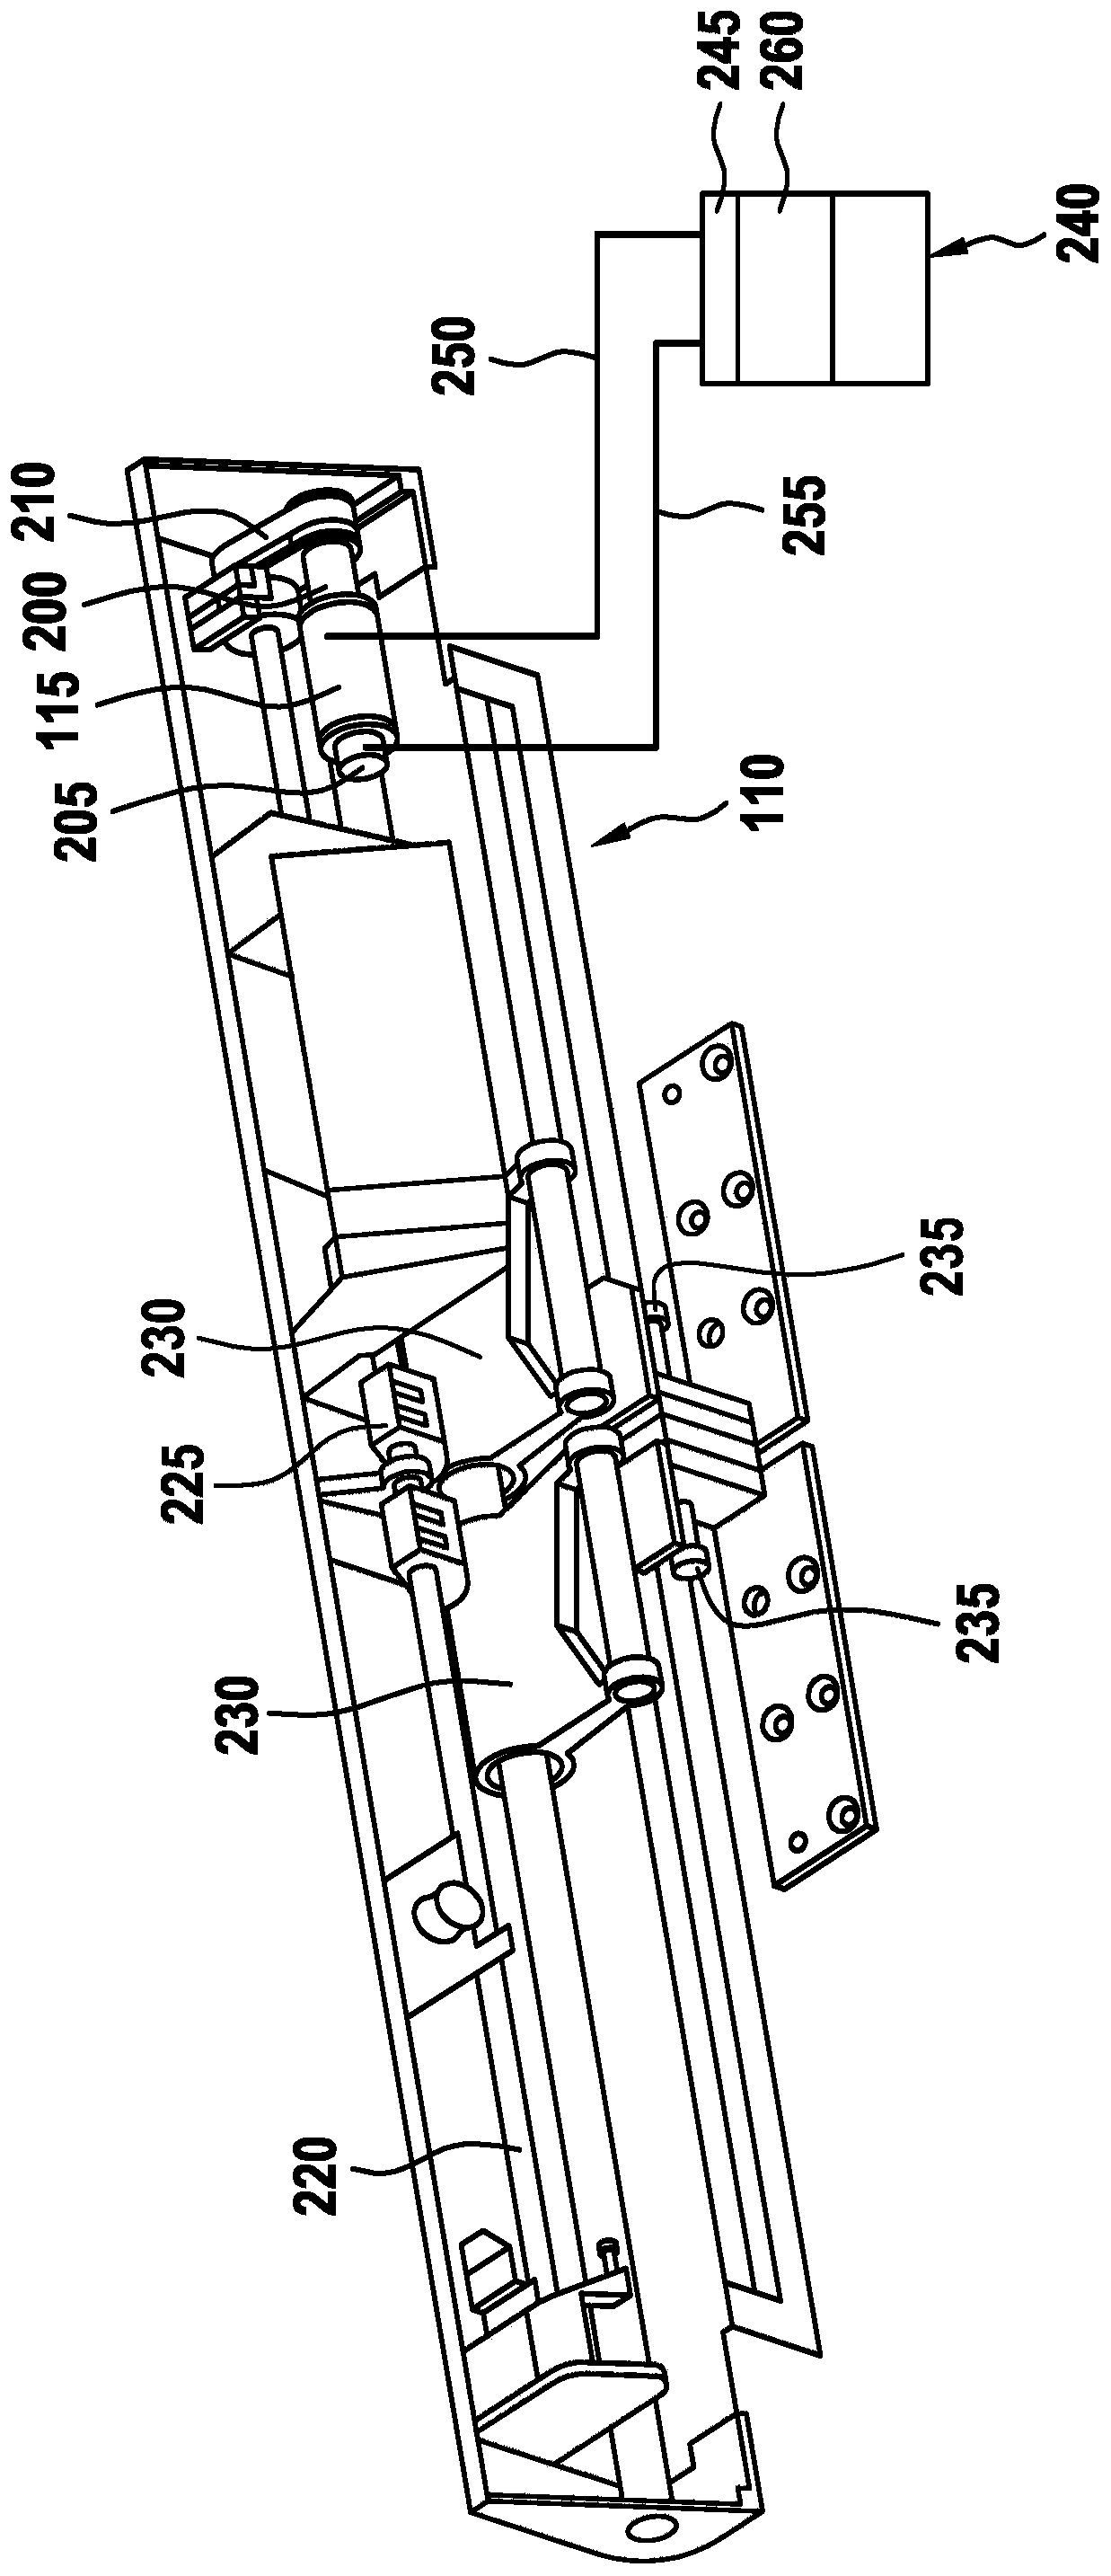 Method and device for detecting the wear state of a component of a door drive system of a rail vehicle